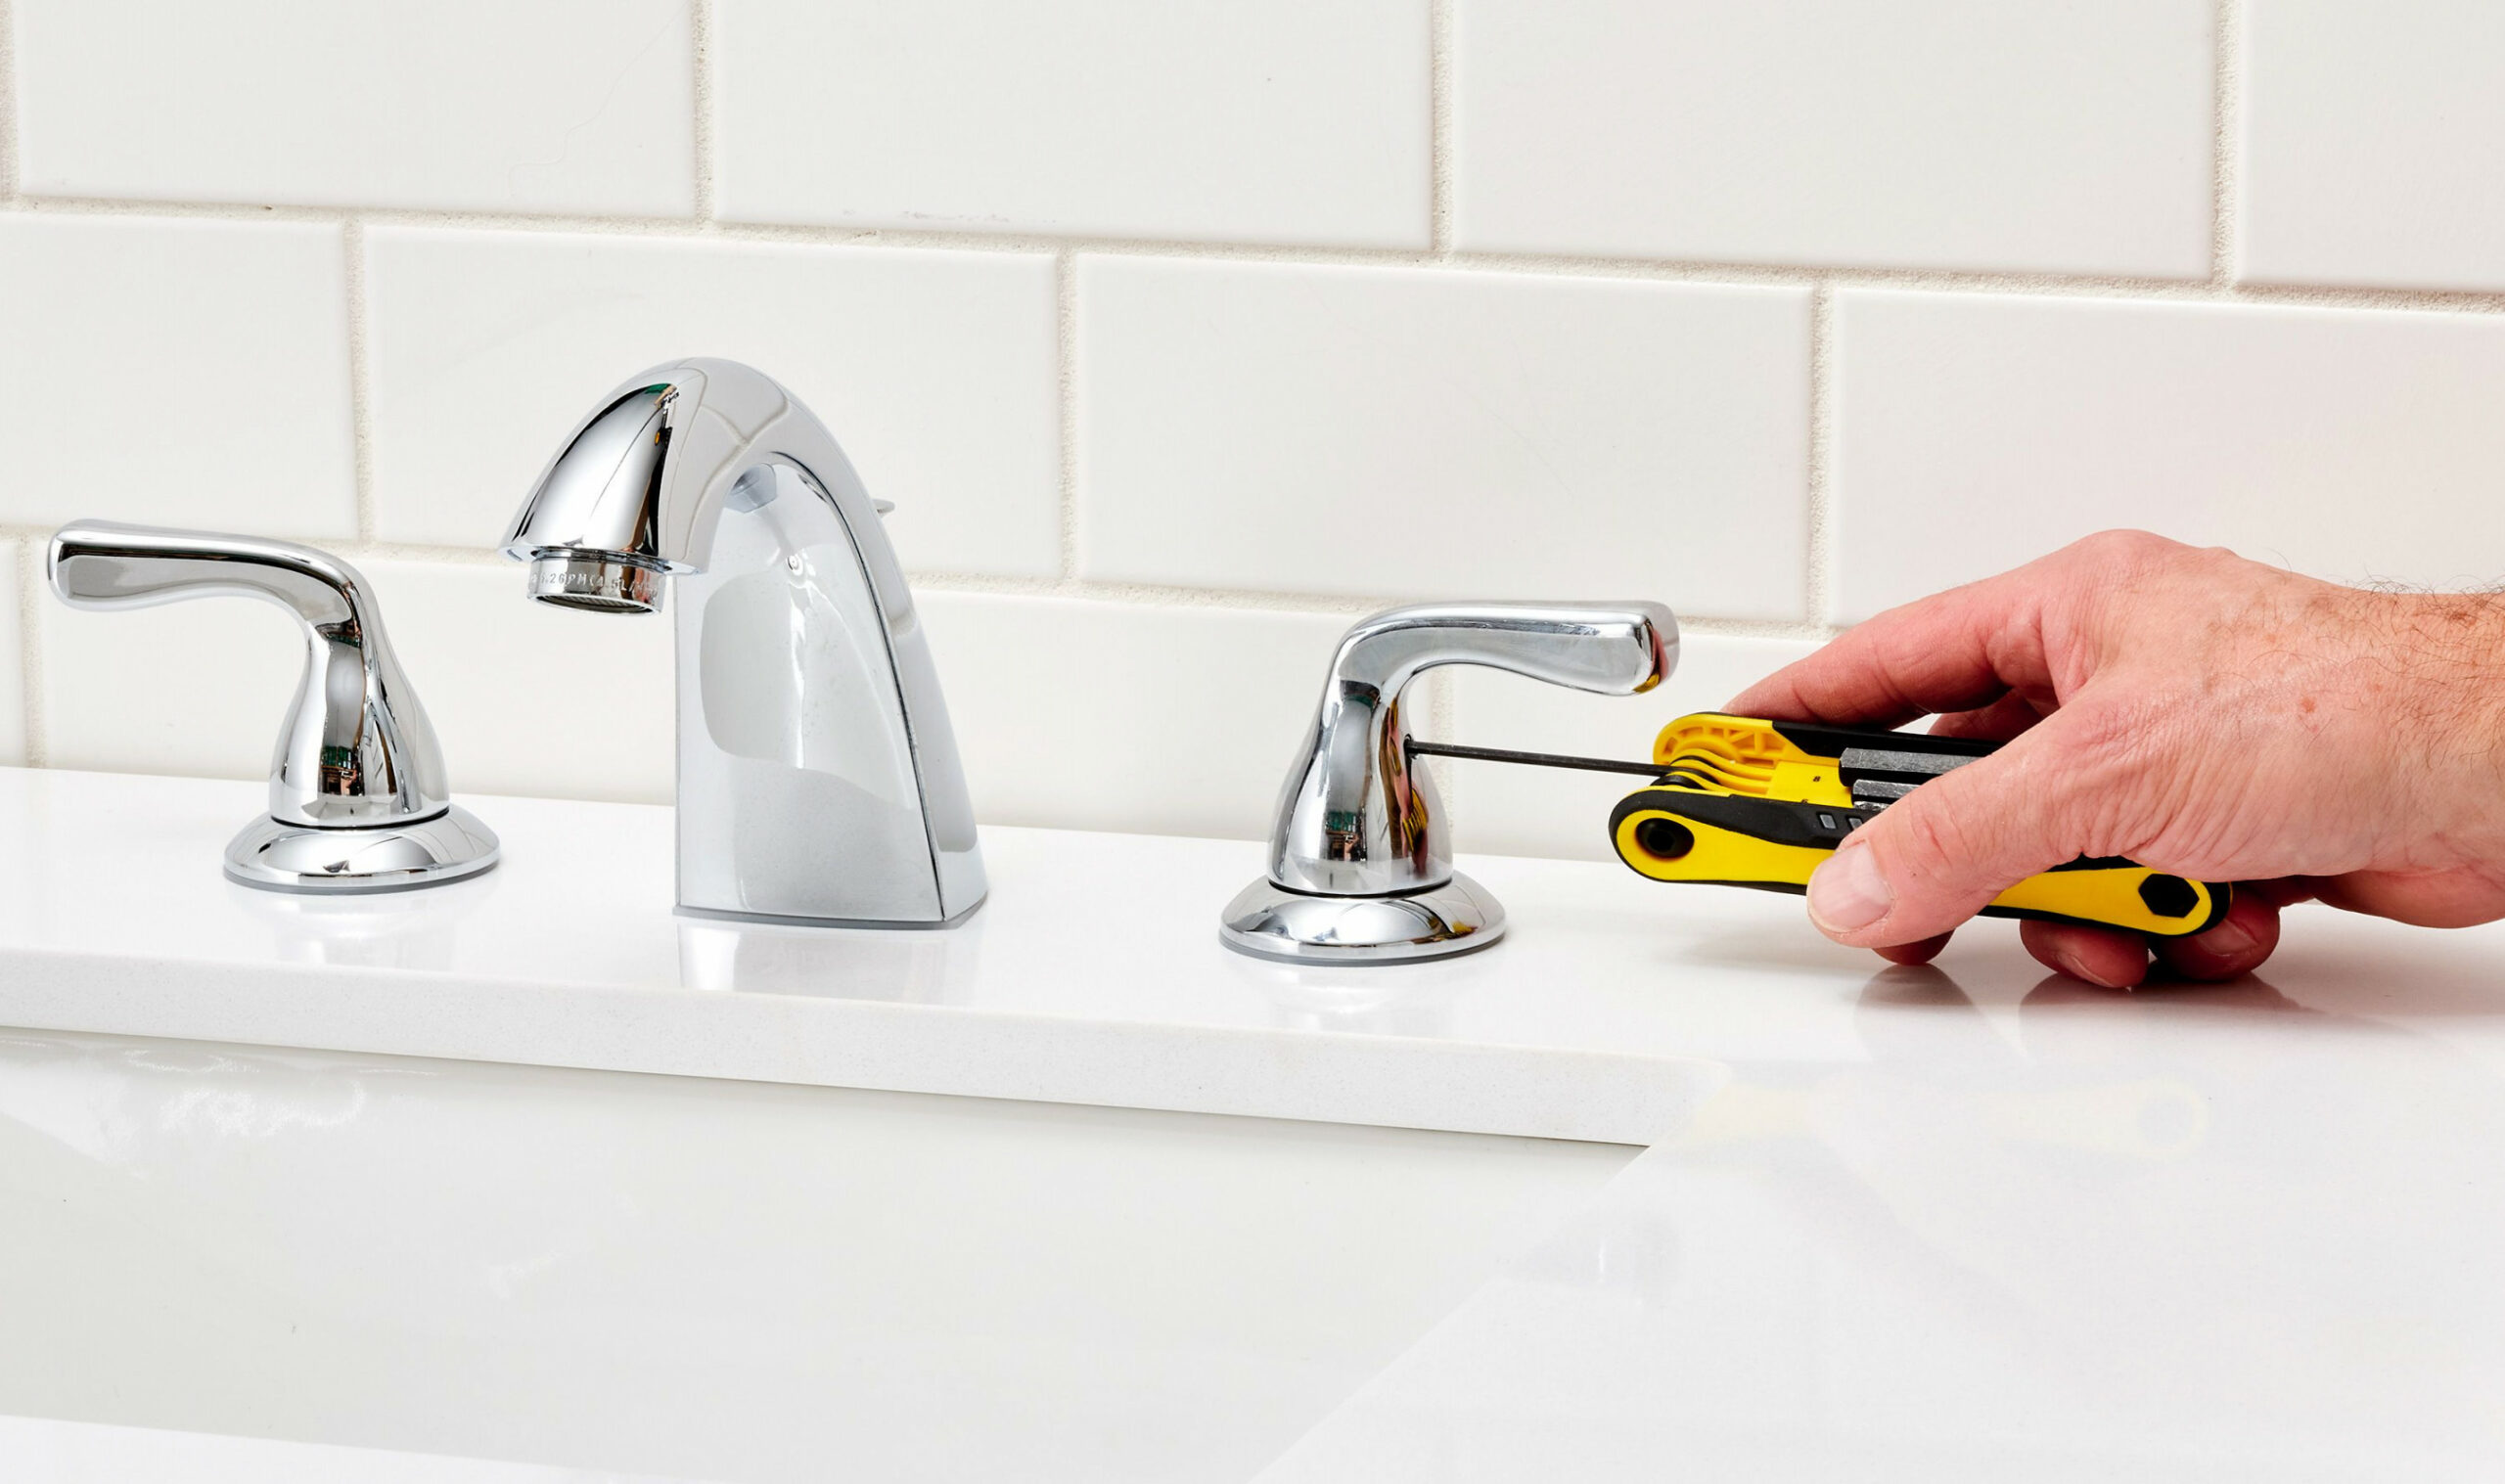 How to Fix a Leaky Faucet (Cartridge or Compression)